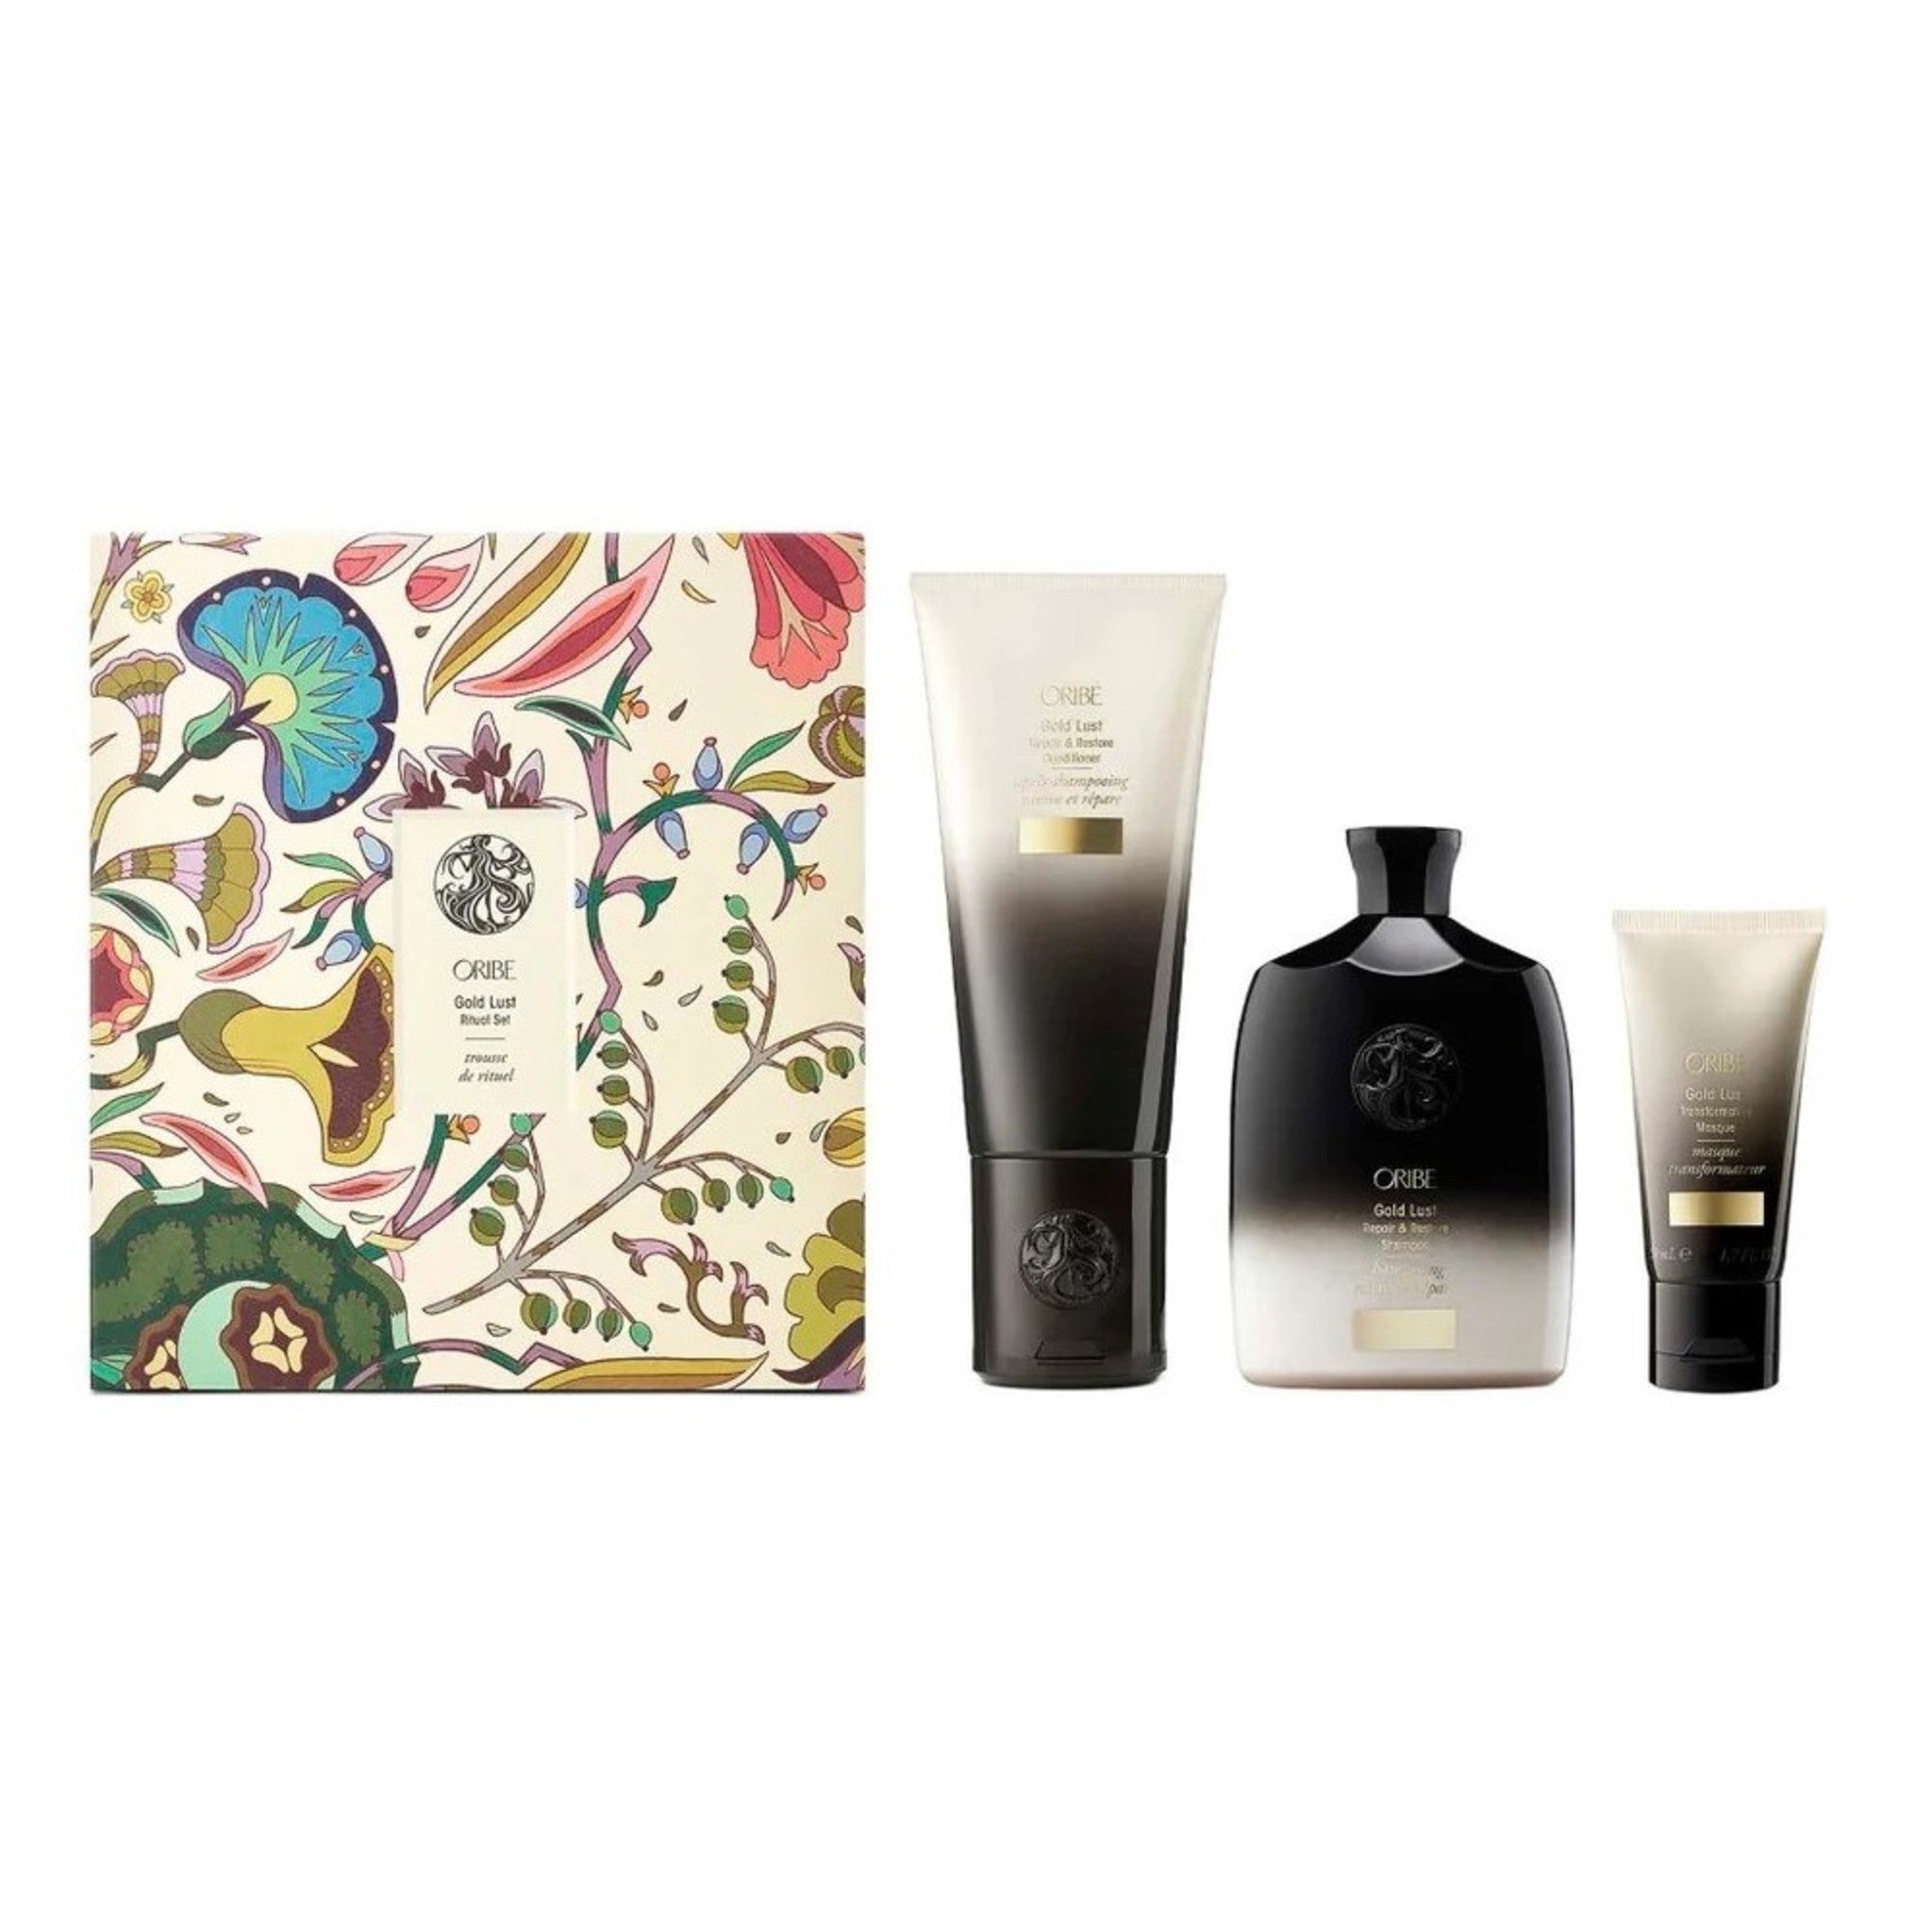 Oribe Gold Lust Repair and Restore Ritual Hair Set (Limited Edition) main image.